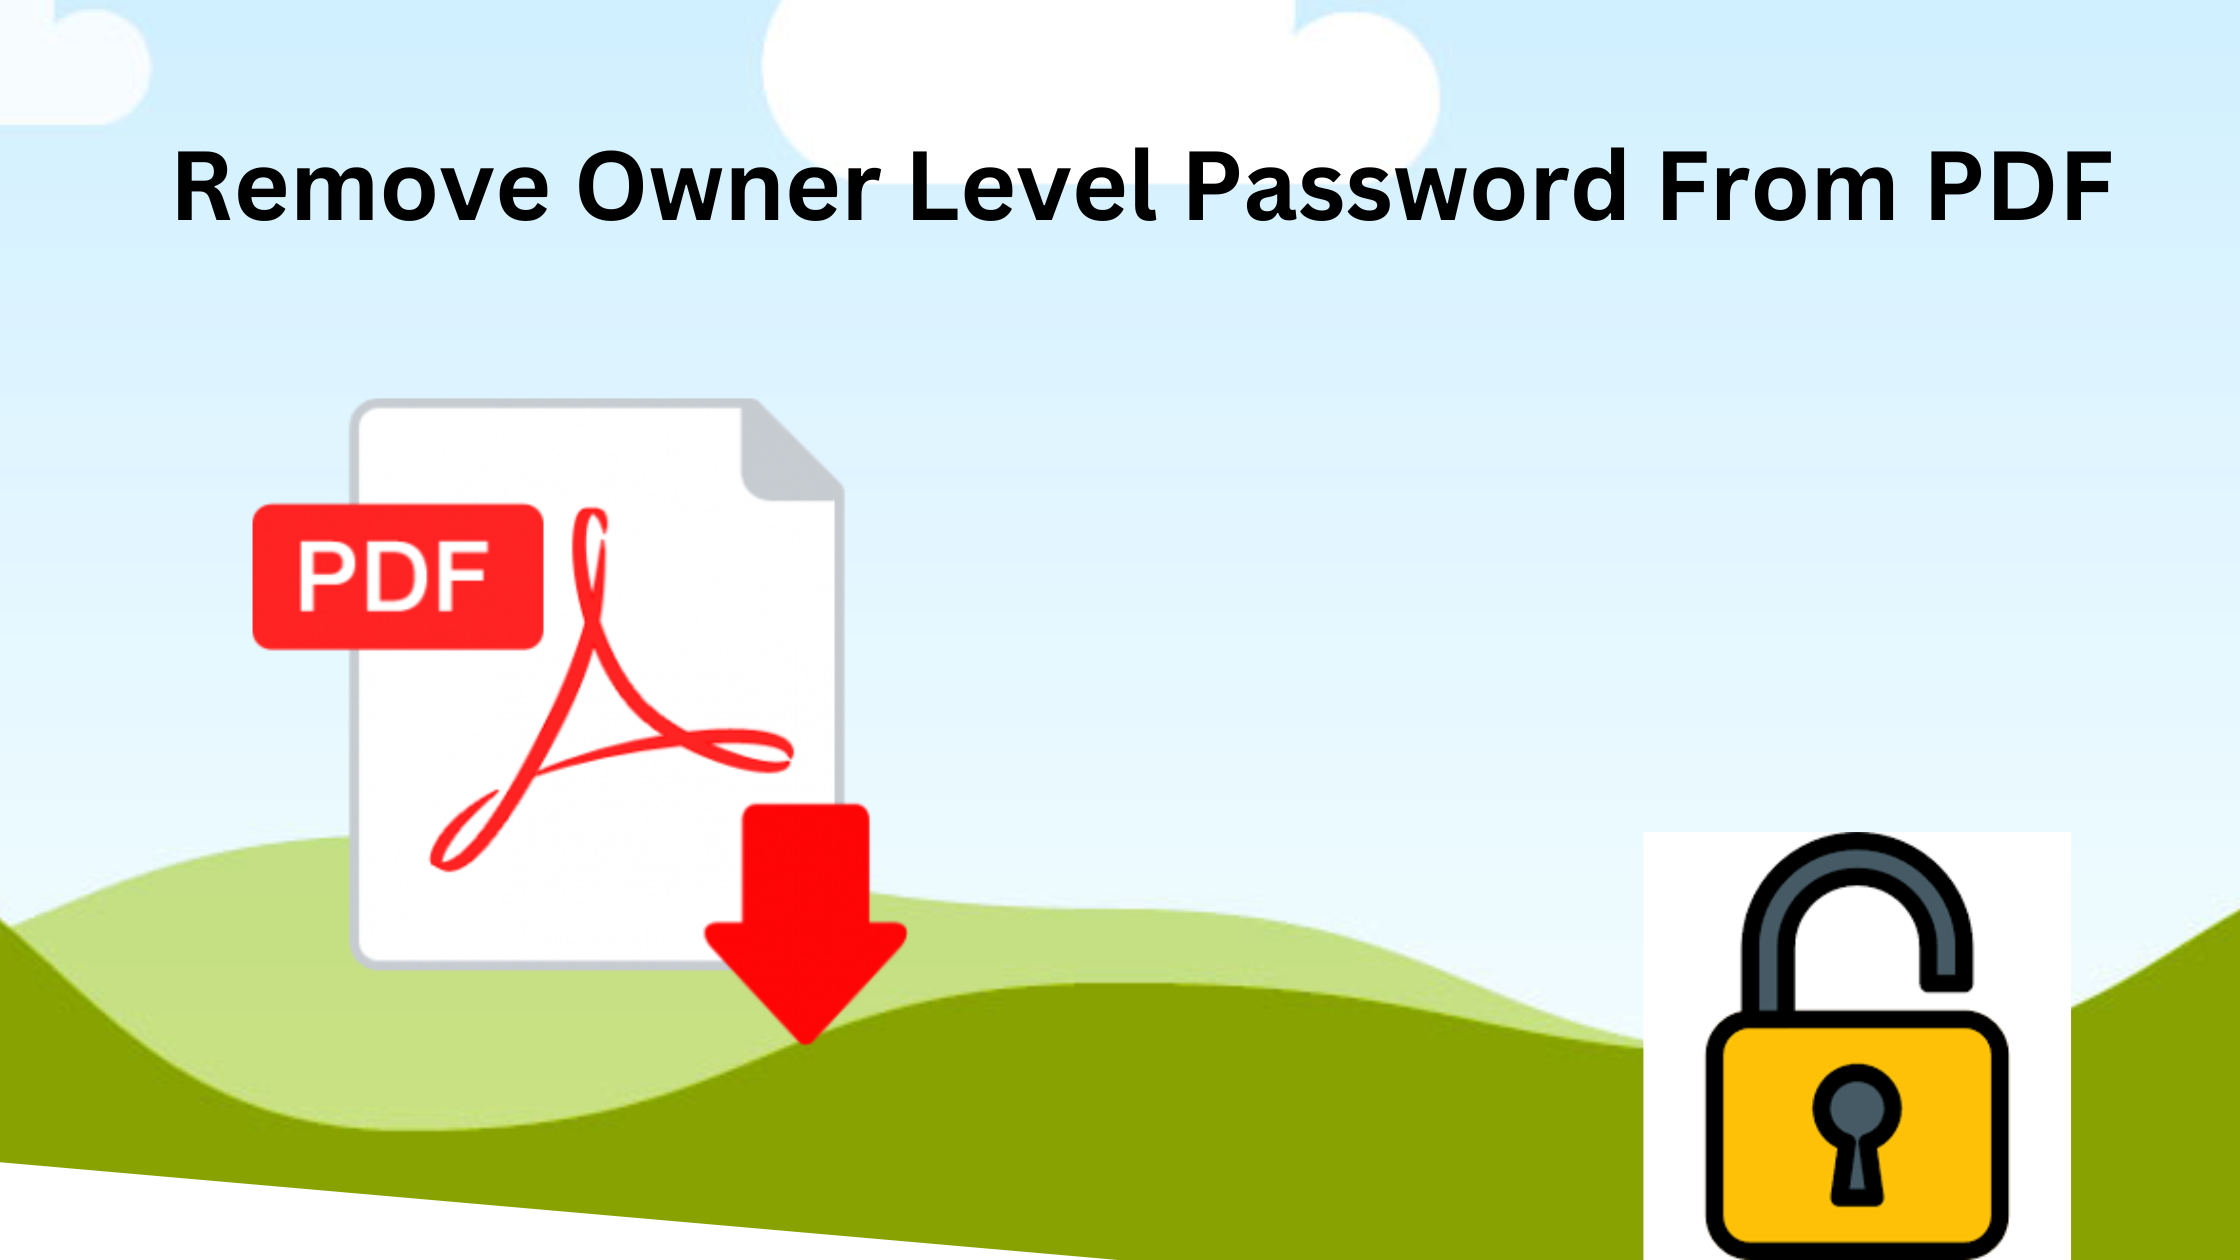 Remove owner level password from PDF